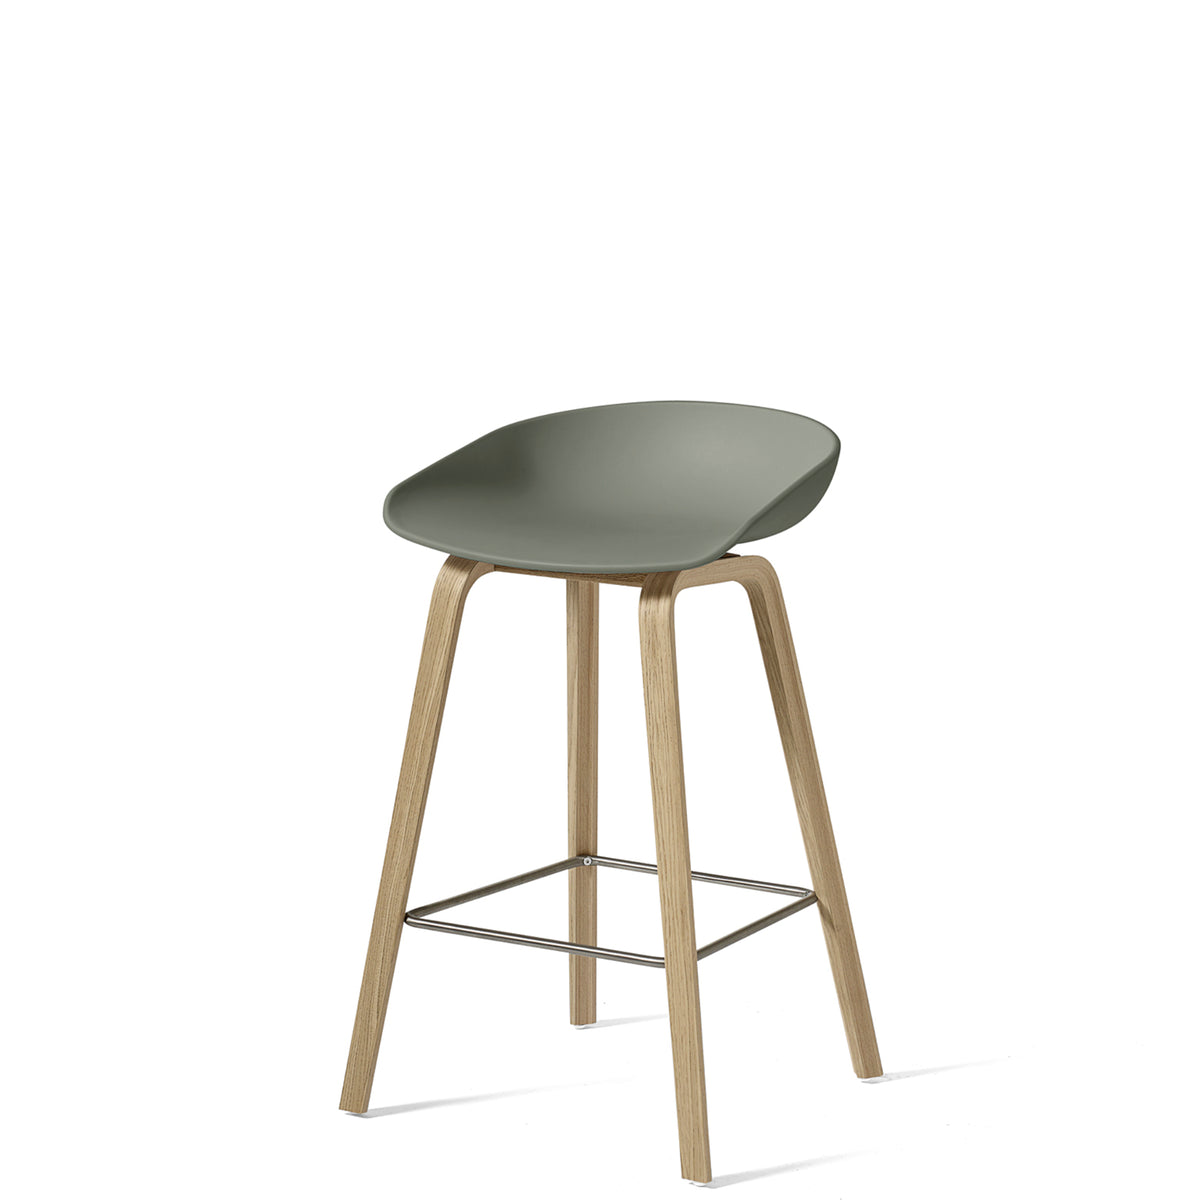 HAY About A Stool AAS32 750mm Dusty Green with Matt Lacquered Oak Base